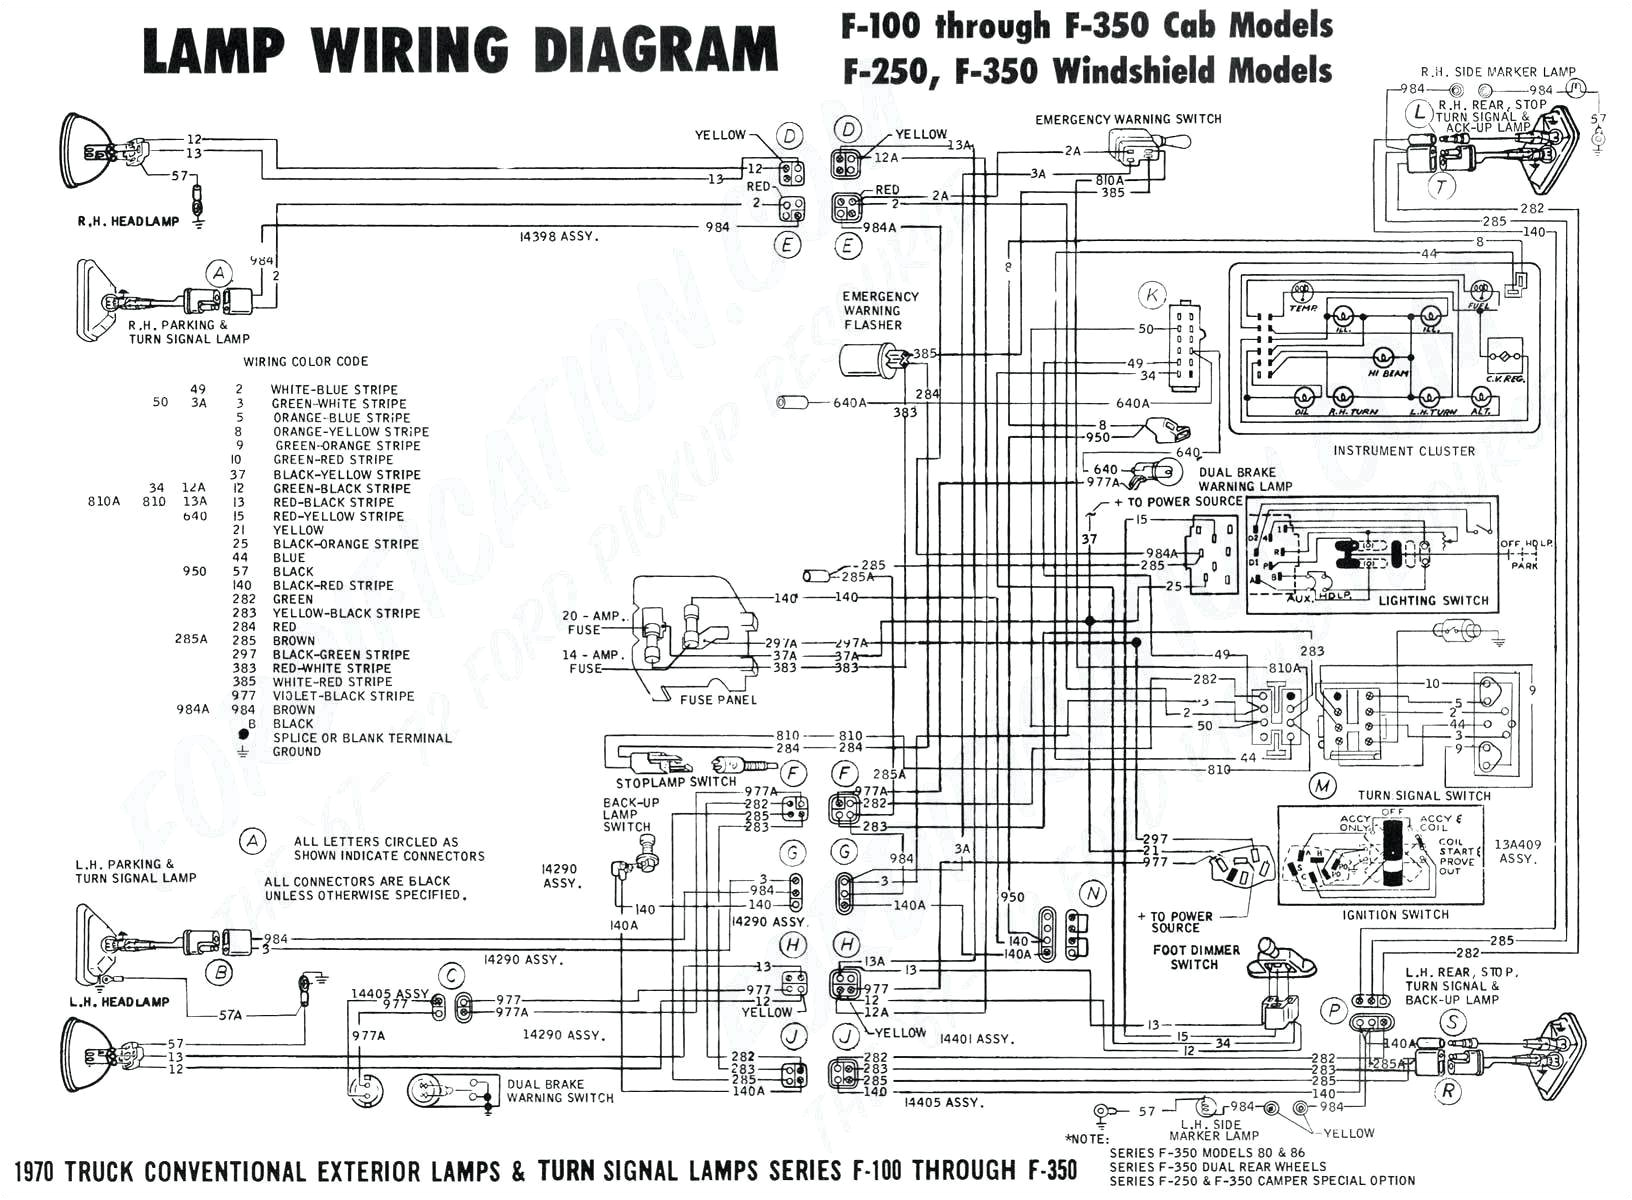 Wiring Diagram for Push button Start 14 Chevy Silverado Wiring Diagram Wiring Diagram Database